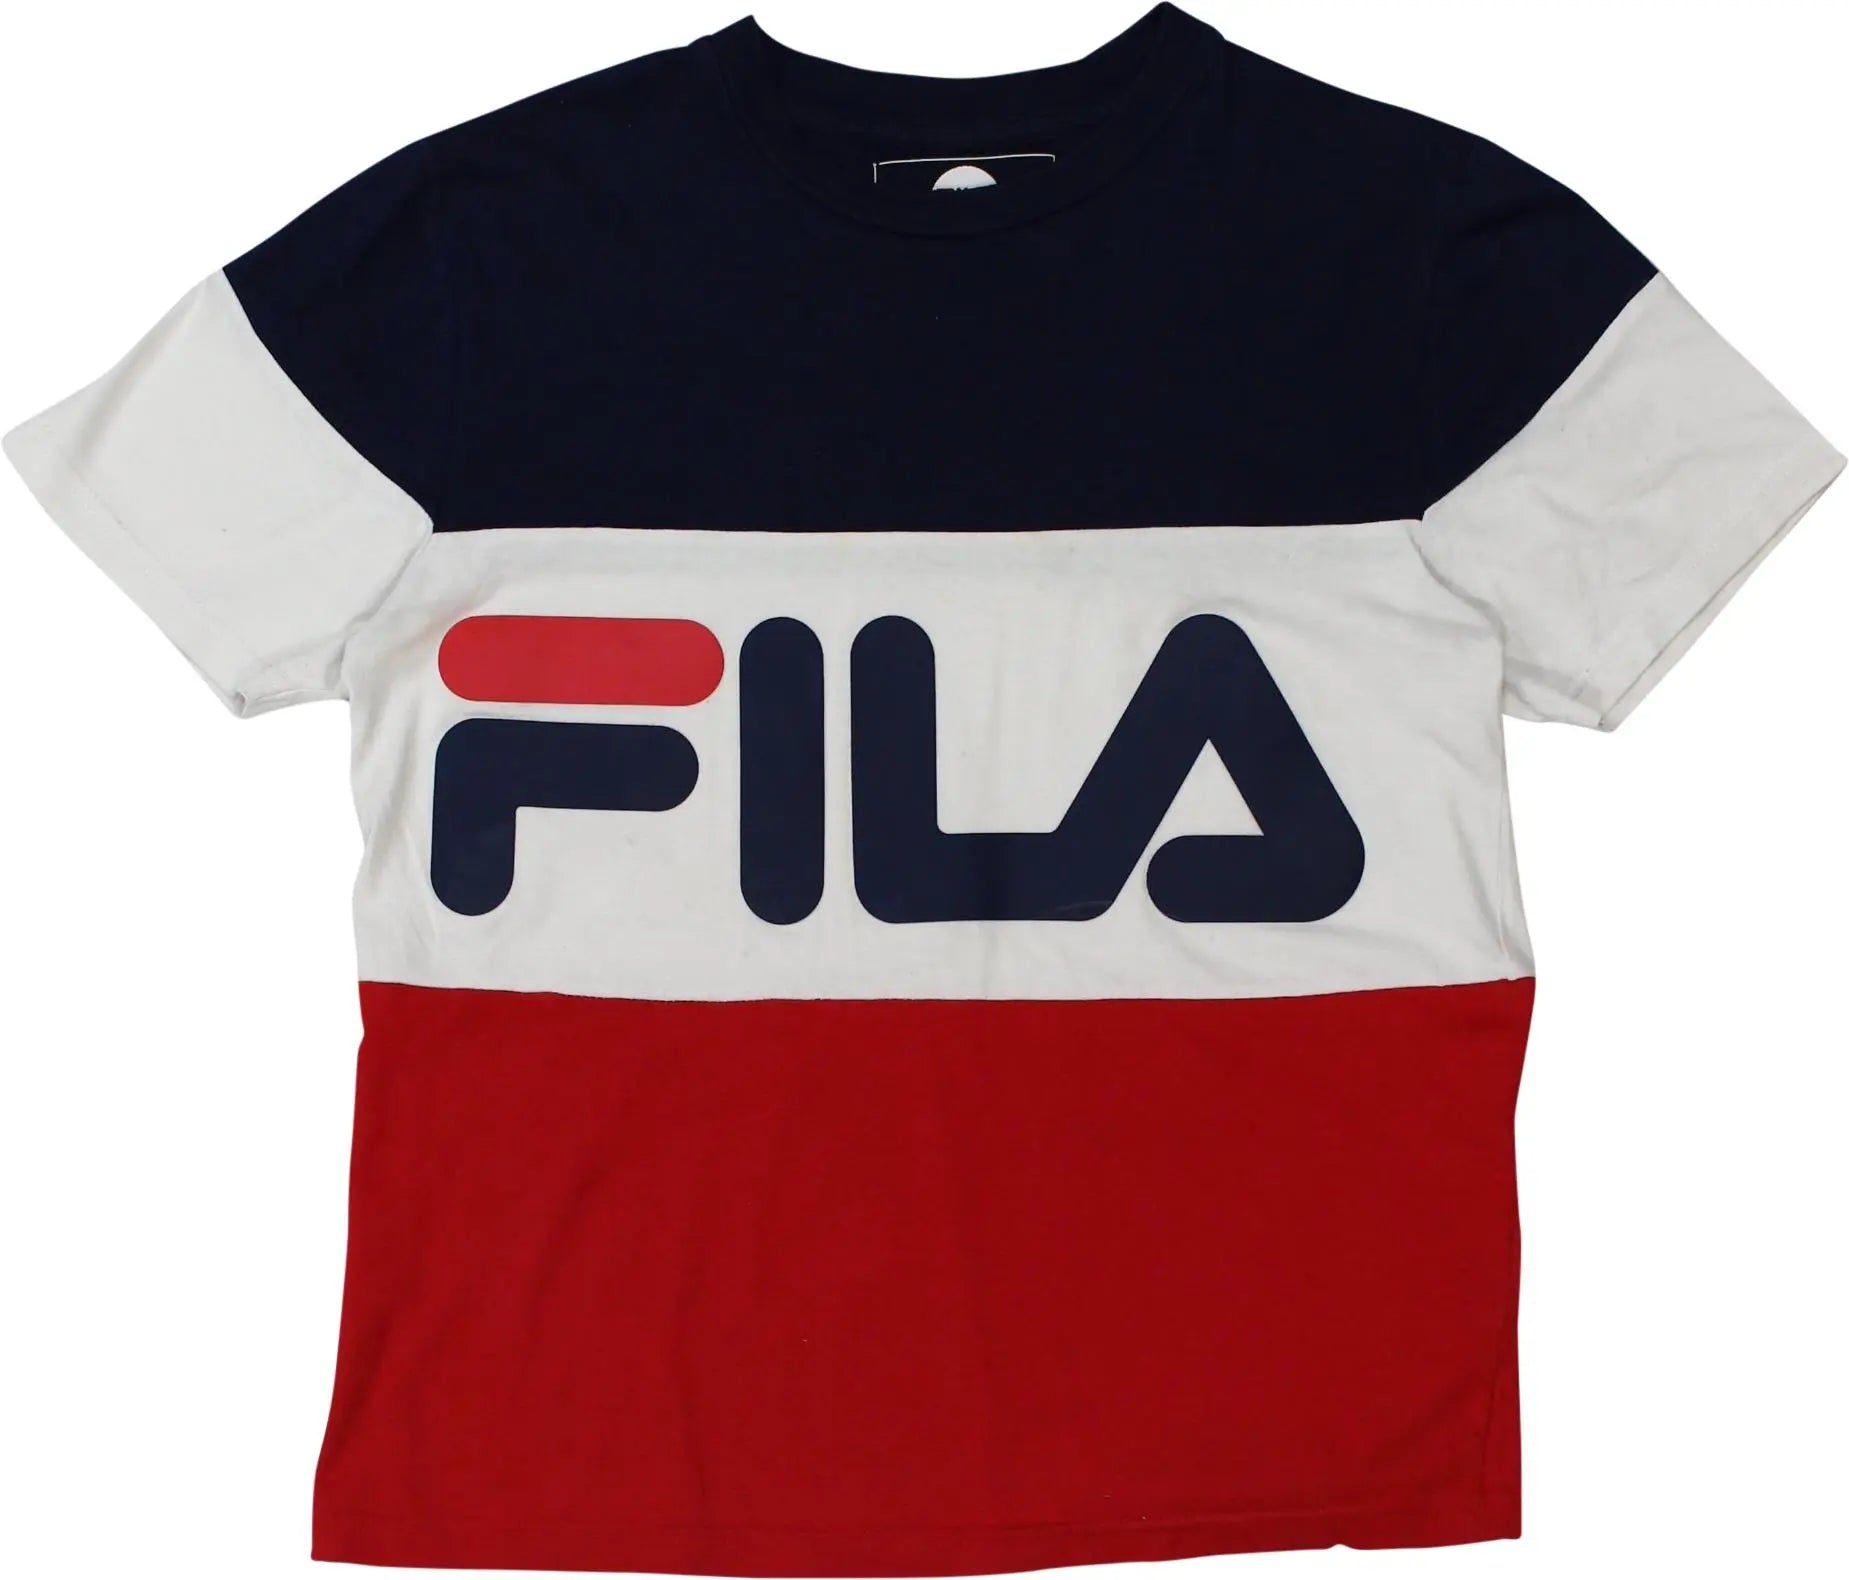 Fila - T-shirt by Fila- ThriftTale.com - Vintage and second handclothing